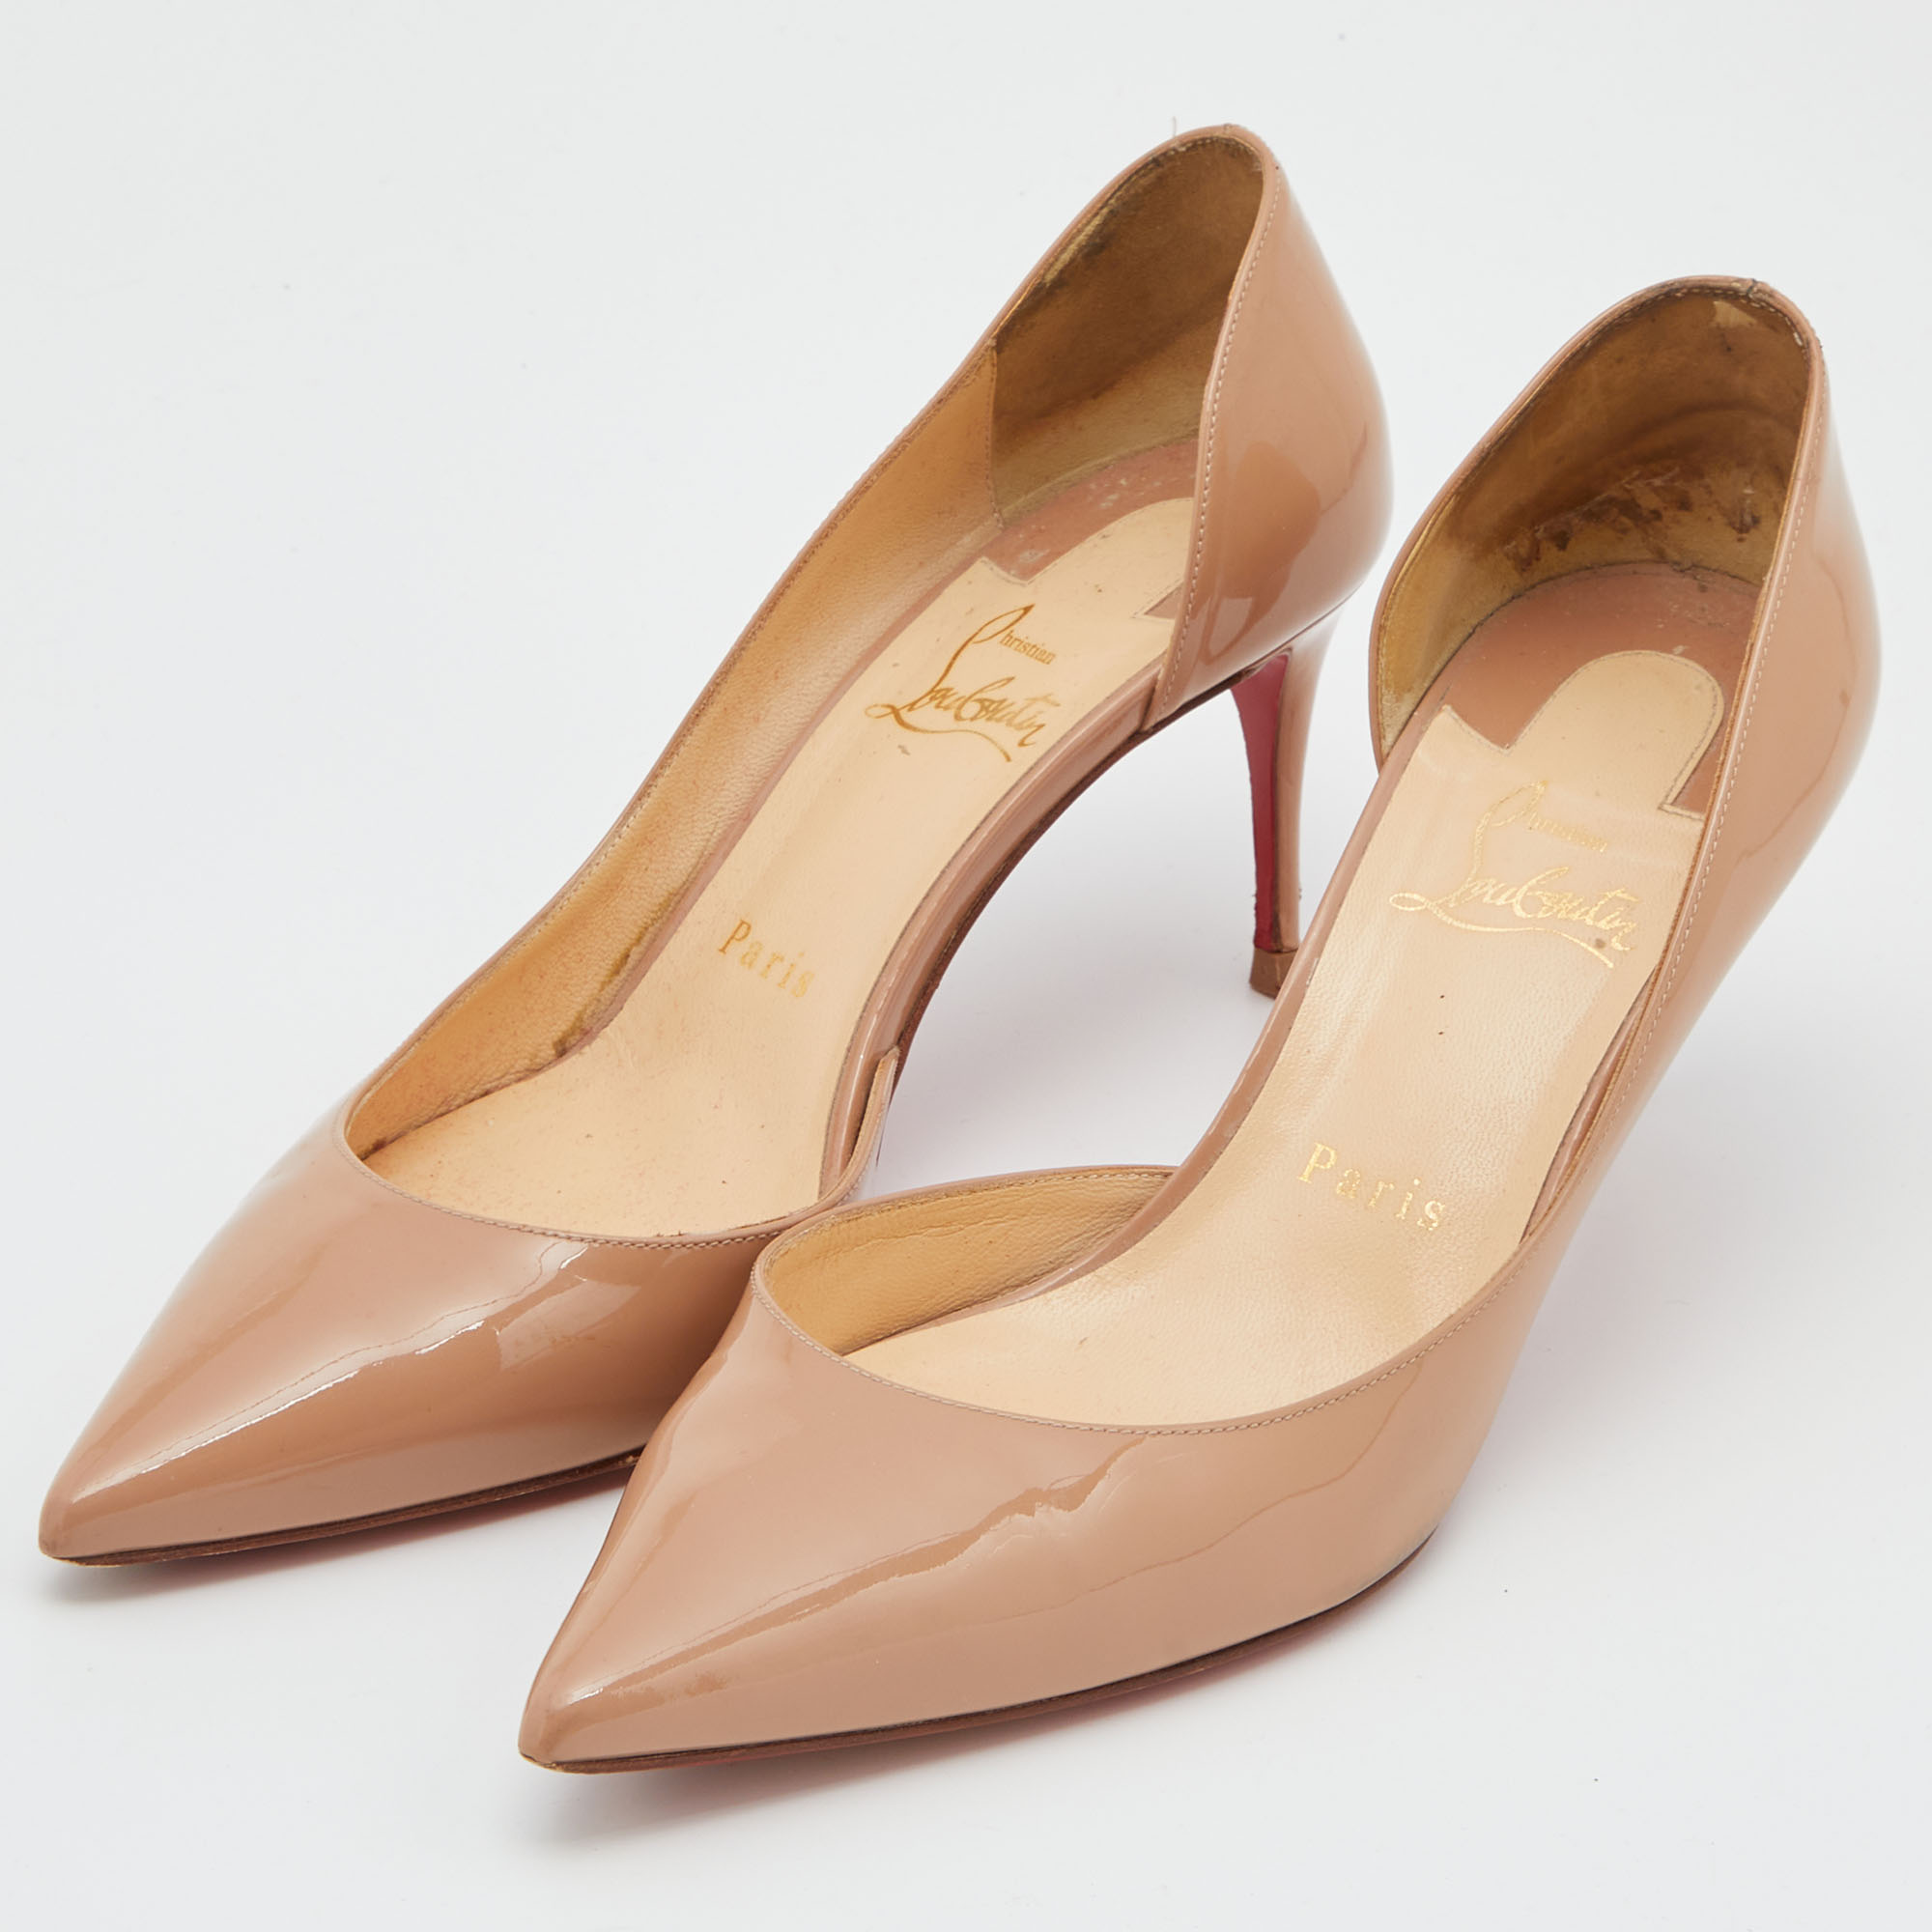 

Christian Louboutin Nude Patent Leather Iriza D'orsay Pumps Size, Beige